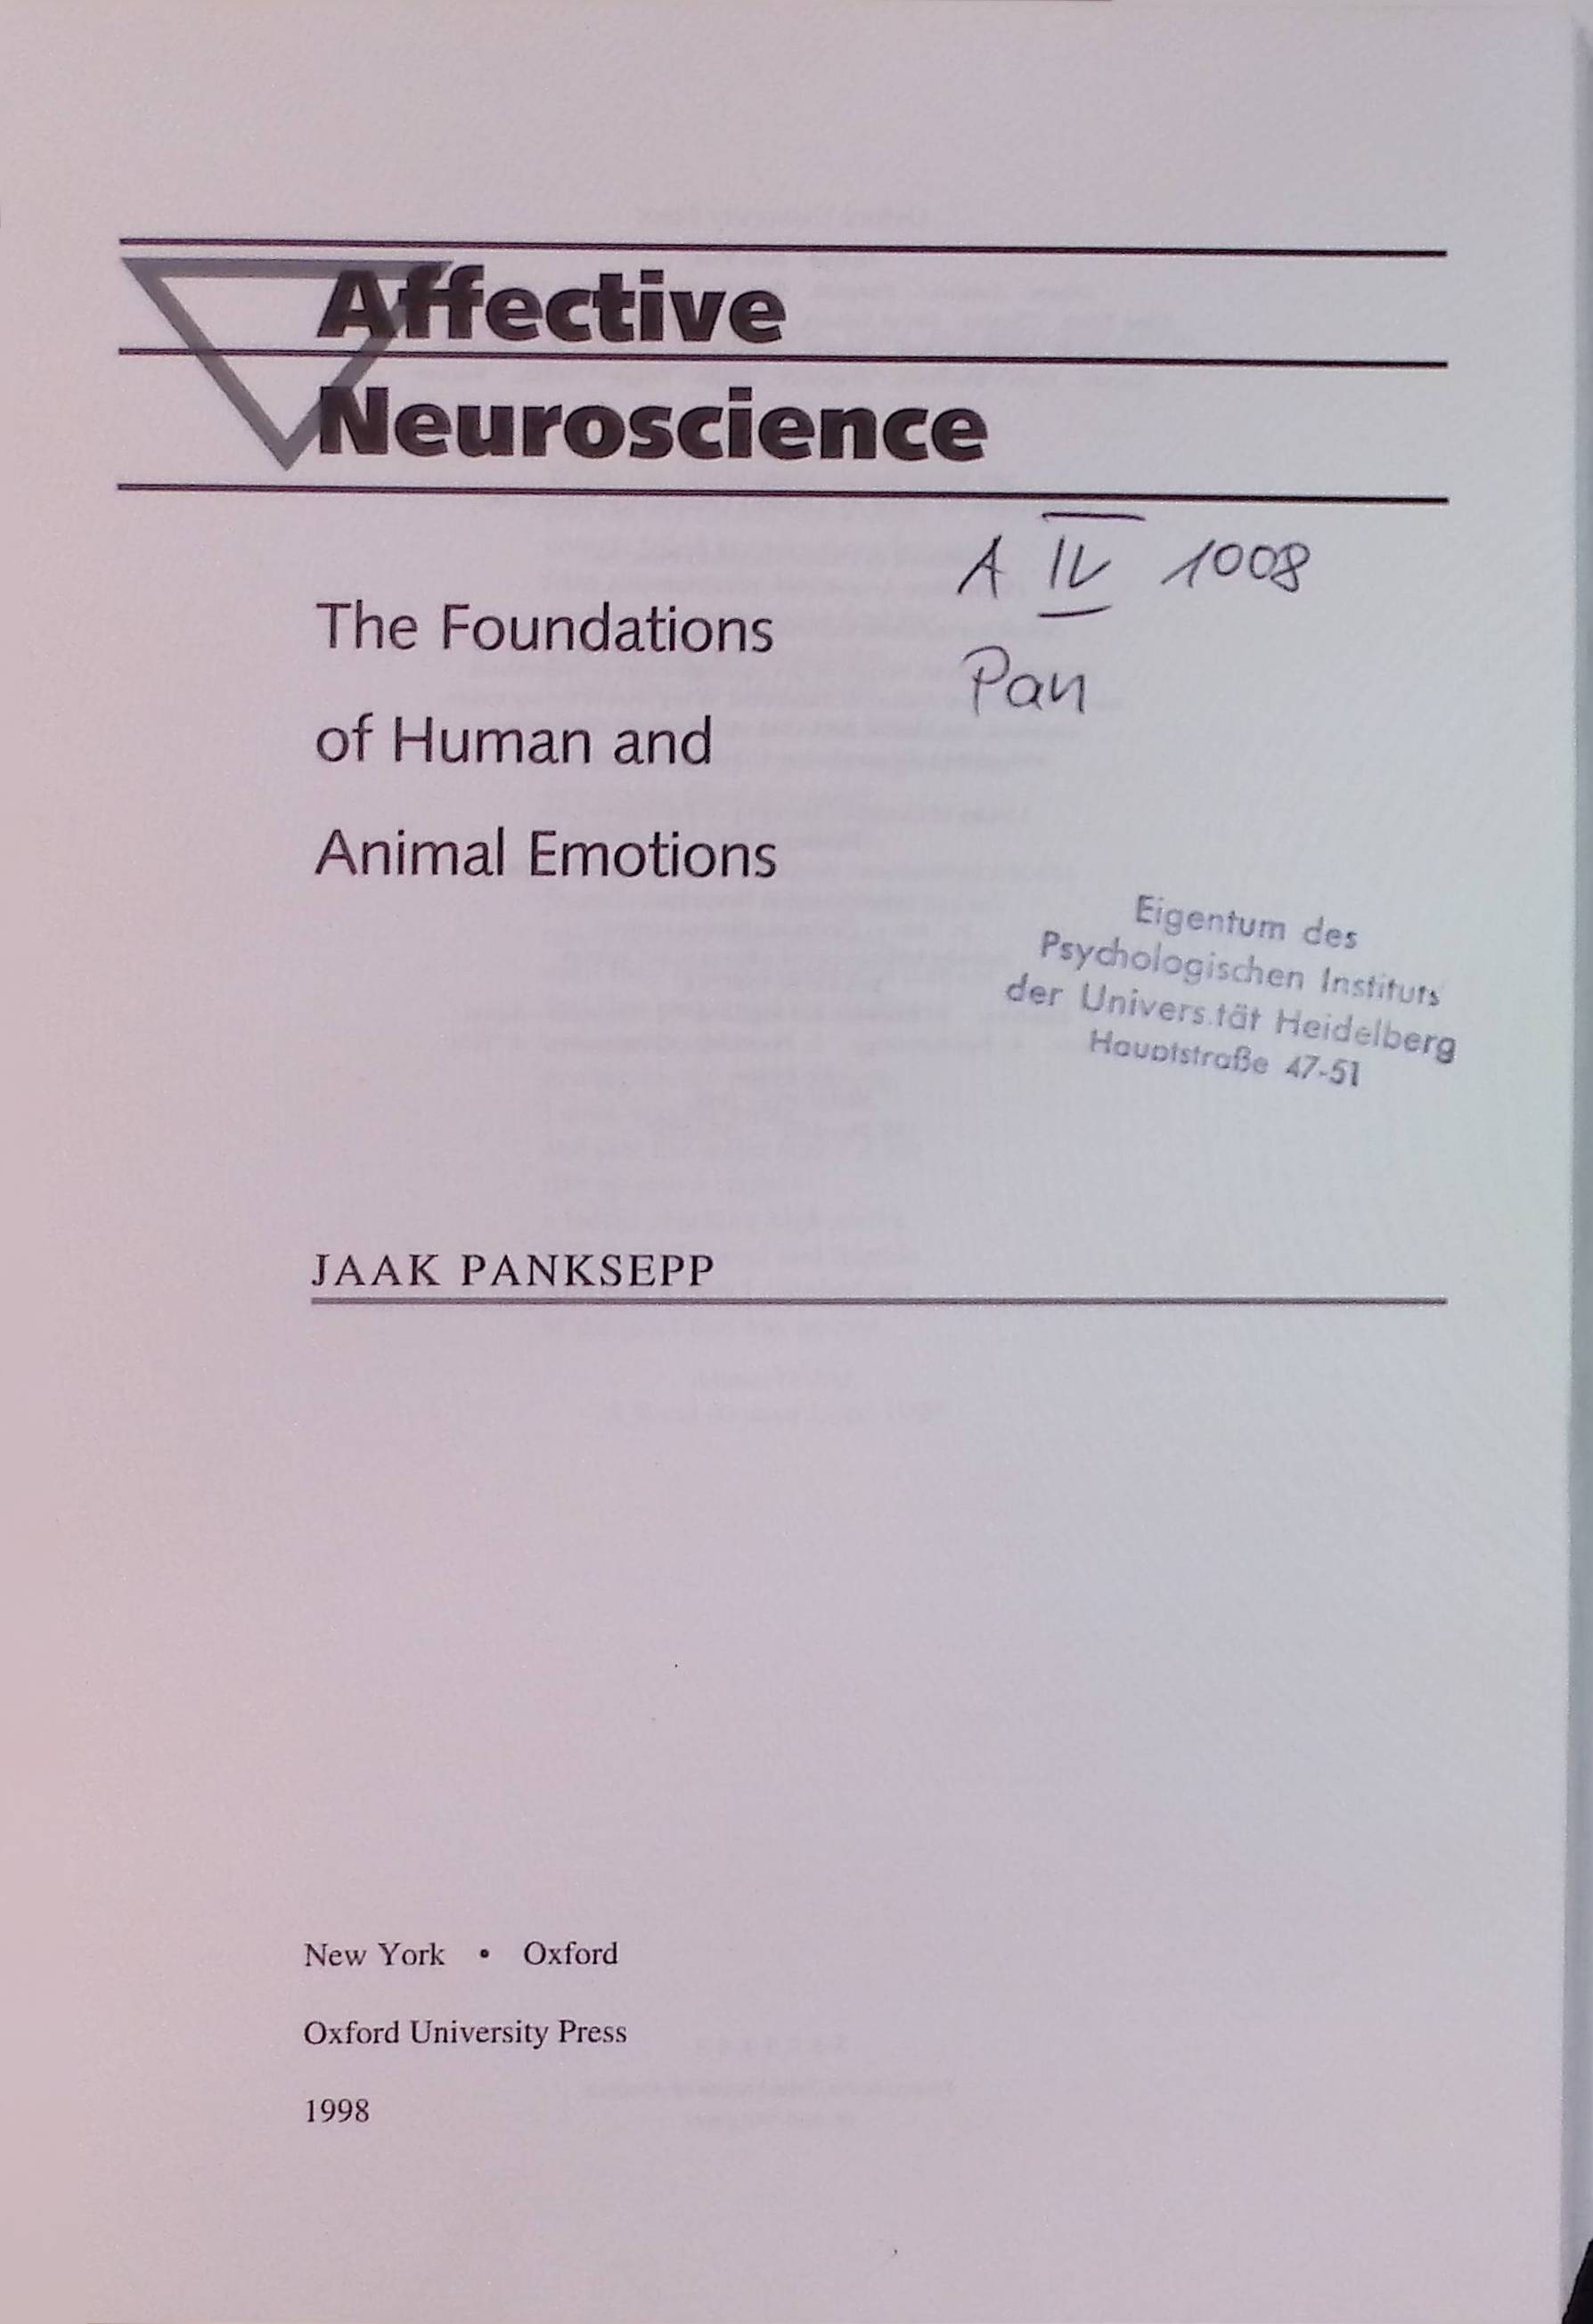 Affective Neuroscience: The Foundations of Human and Animal Emotions Series in Affective Science - Panskepp, Jaak and Jaak Panksepp